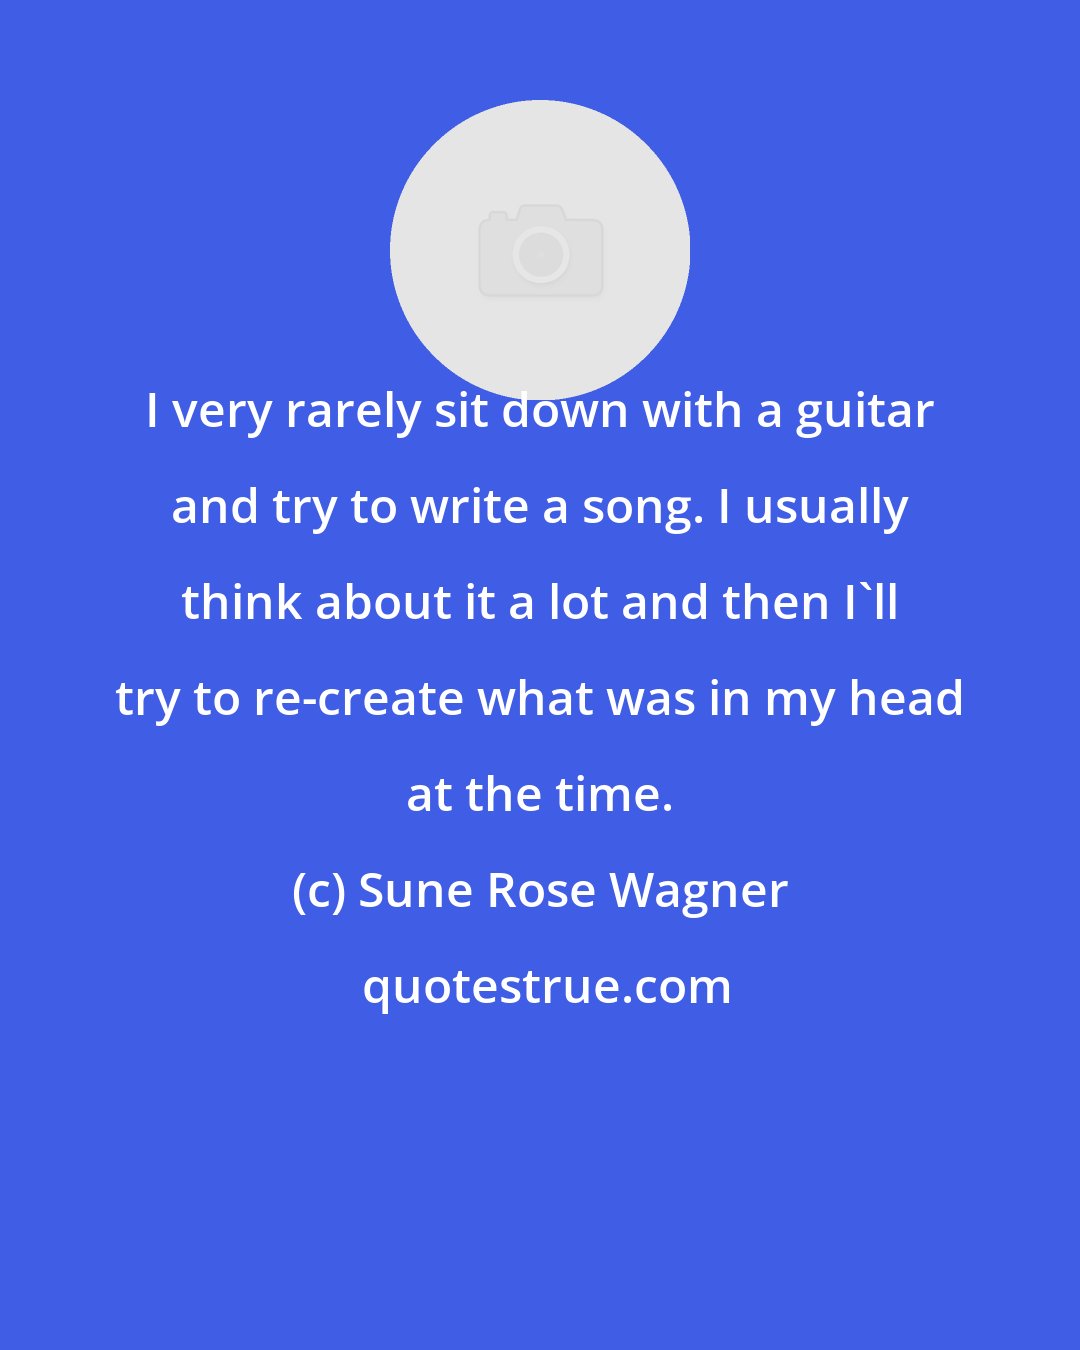 Sune Rose Wagner: I very rarely sit down with a guitar and try to write a song. I usually think about it a lot and then I'll try to re-create what was in my head at the time.